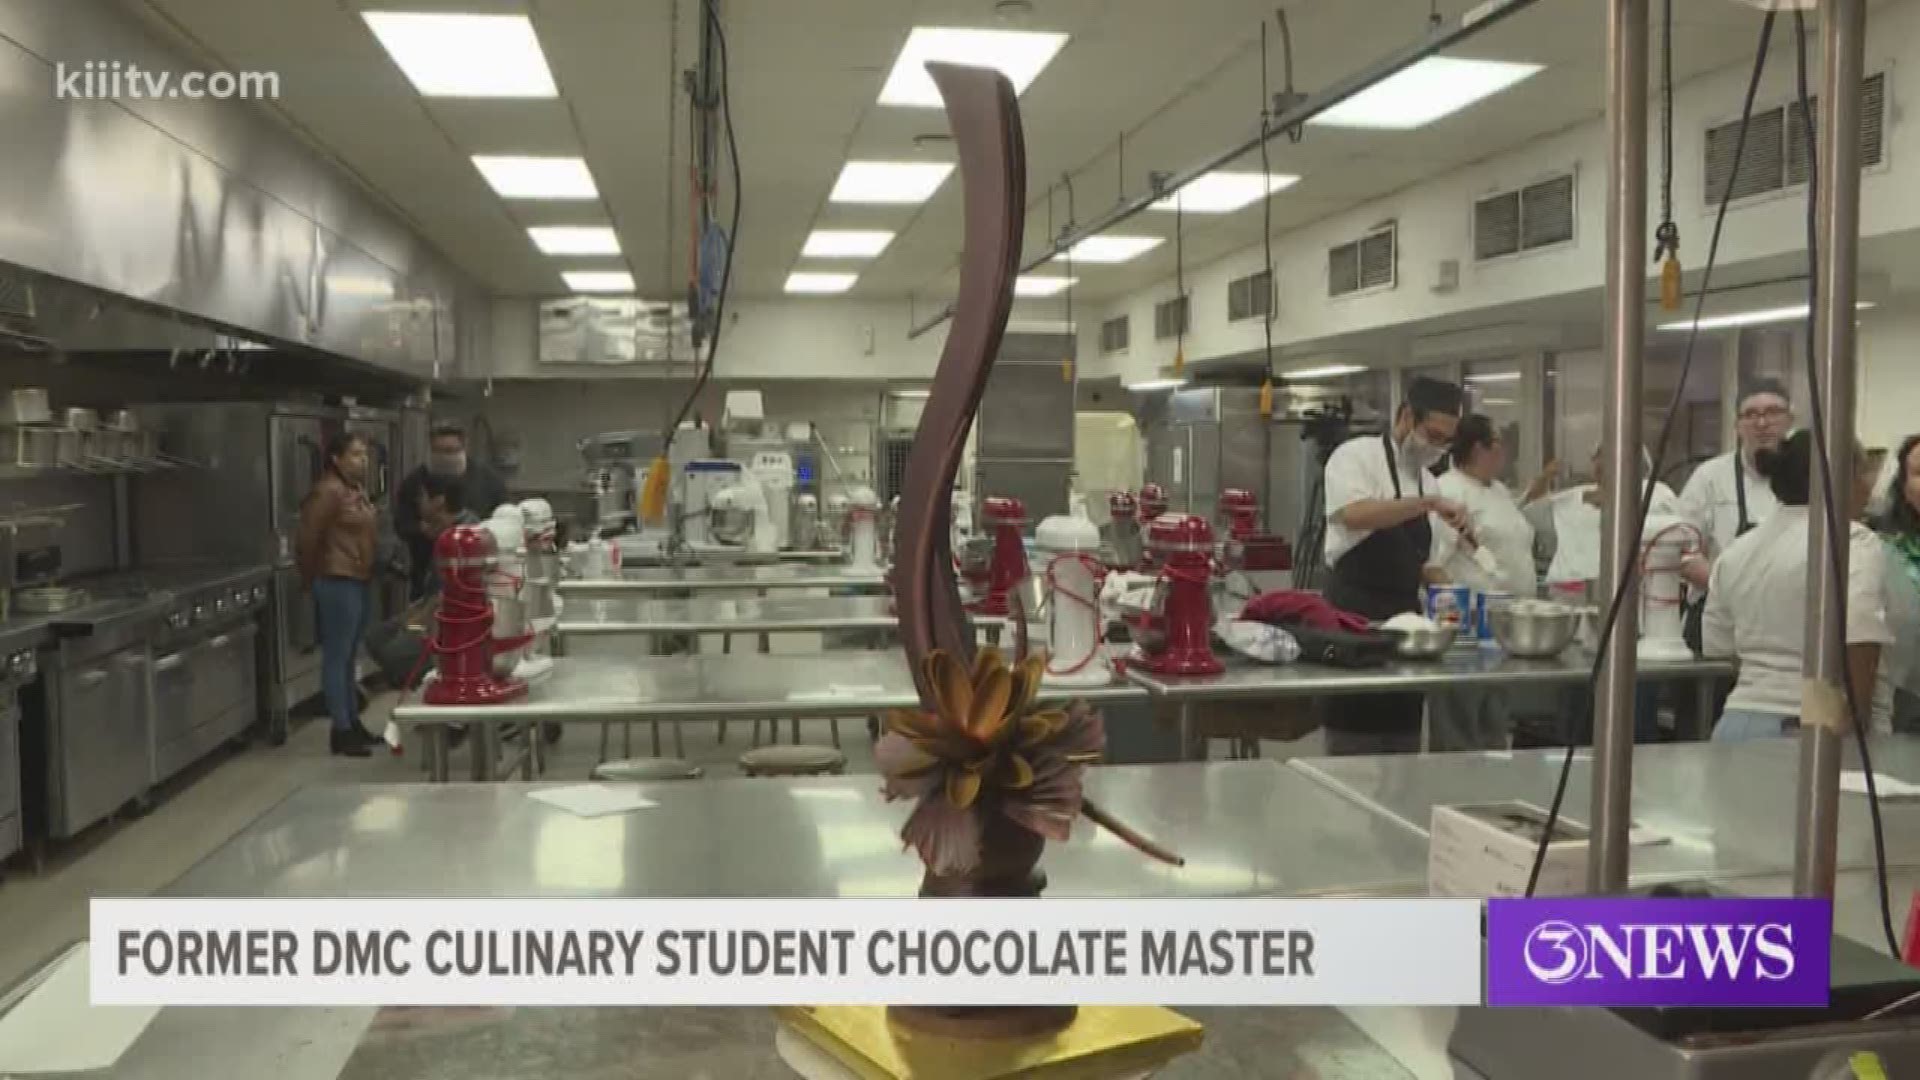 Culinary students with Del Mar College had a hands-on experience learning a new art form by making edible sculptures out of chocolate.